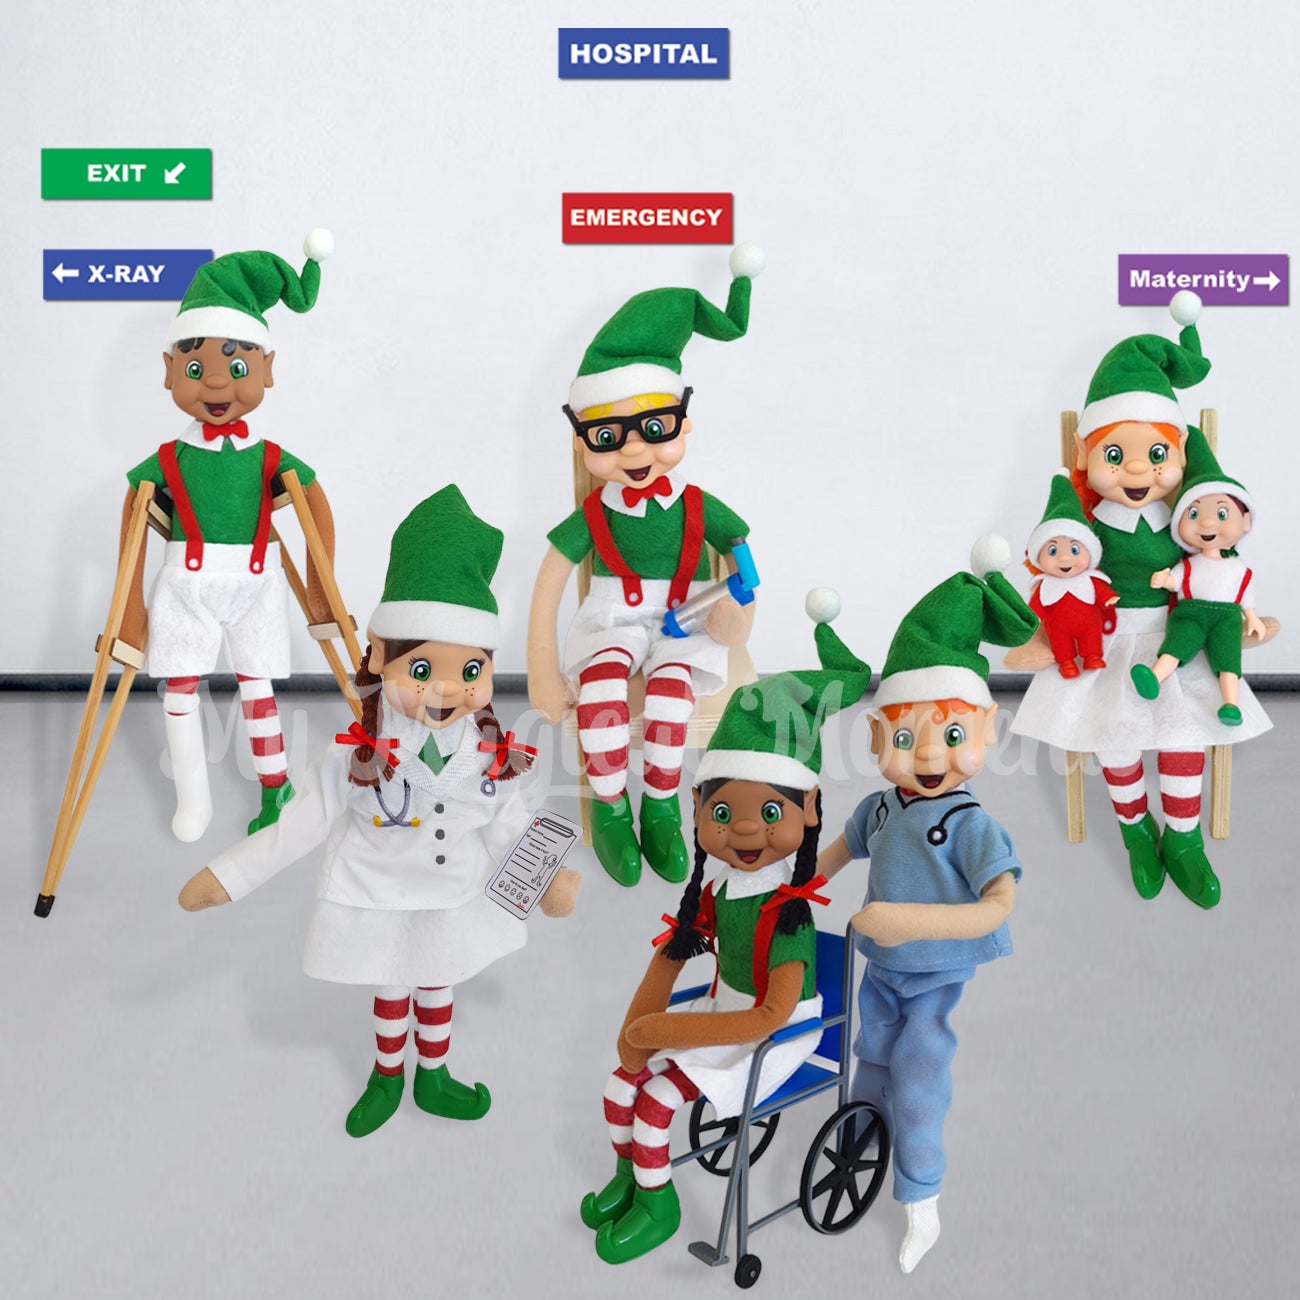 Elf Hospital Scene, with free printable hospital signs. Emergency, x-ray and maternity. One elf has a broken leg, another is having an asthma attack. A mum elf has her elf baby and elf toddler. A elf dressed as a nurse is pushing an elf in a blue wheelchair